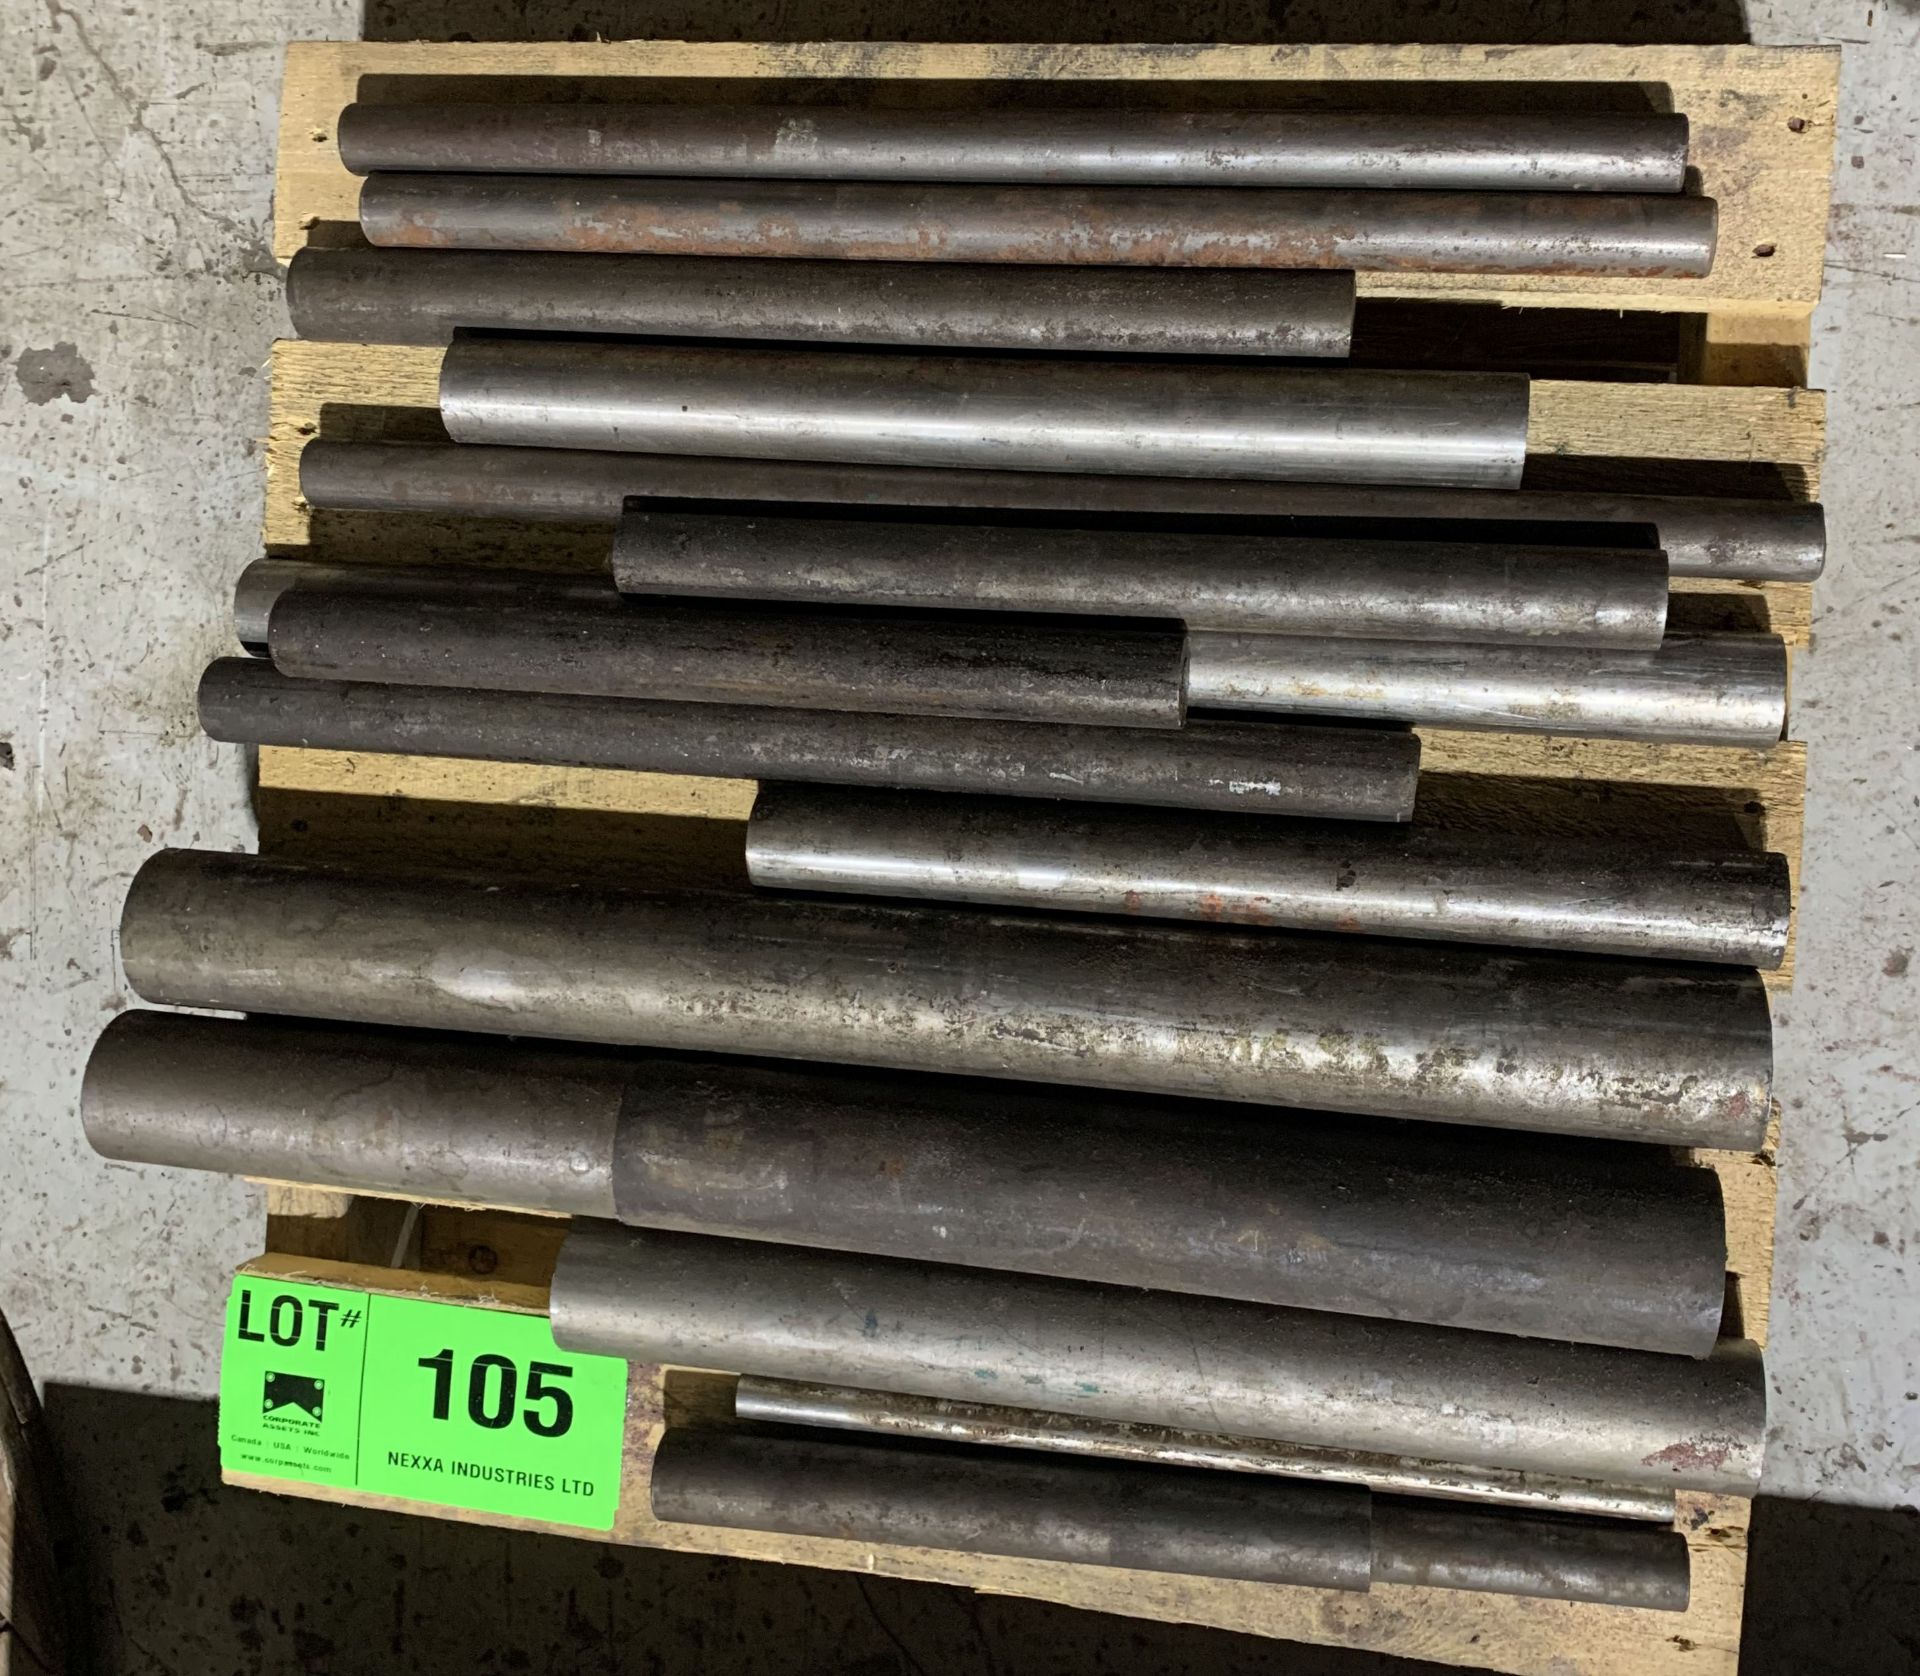 LOT/ PALLET WITH CONTENTS CONSISTING OF STEEL BAR STOCK [RIGGING FEE FOR LOT #105 - $TBD CAD PLUS